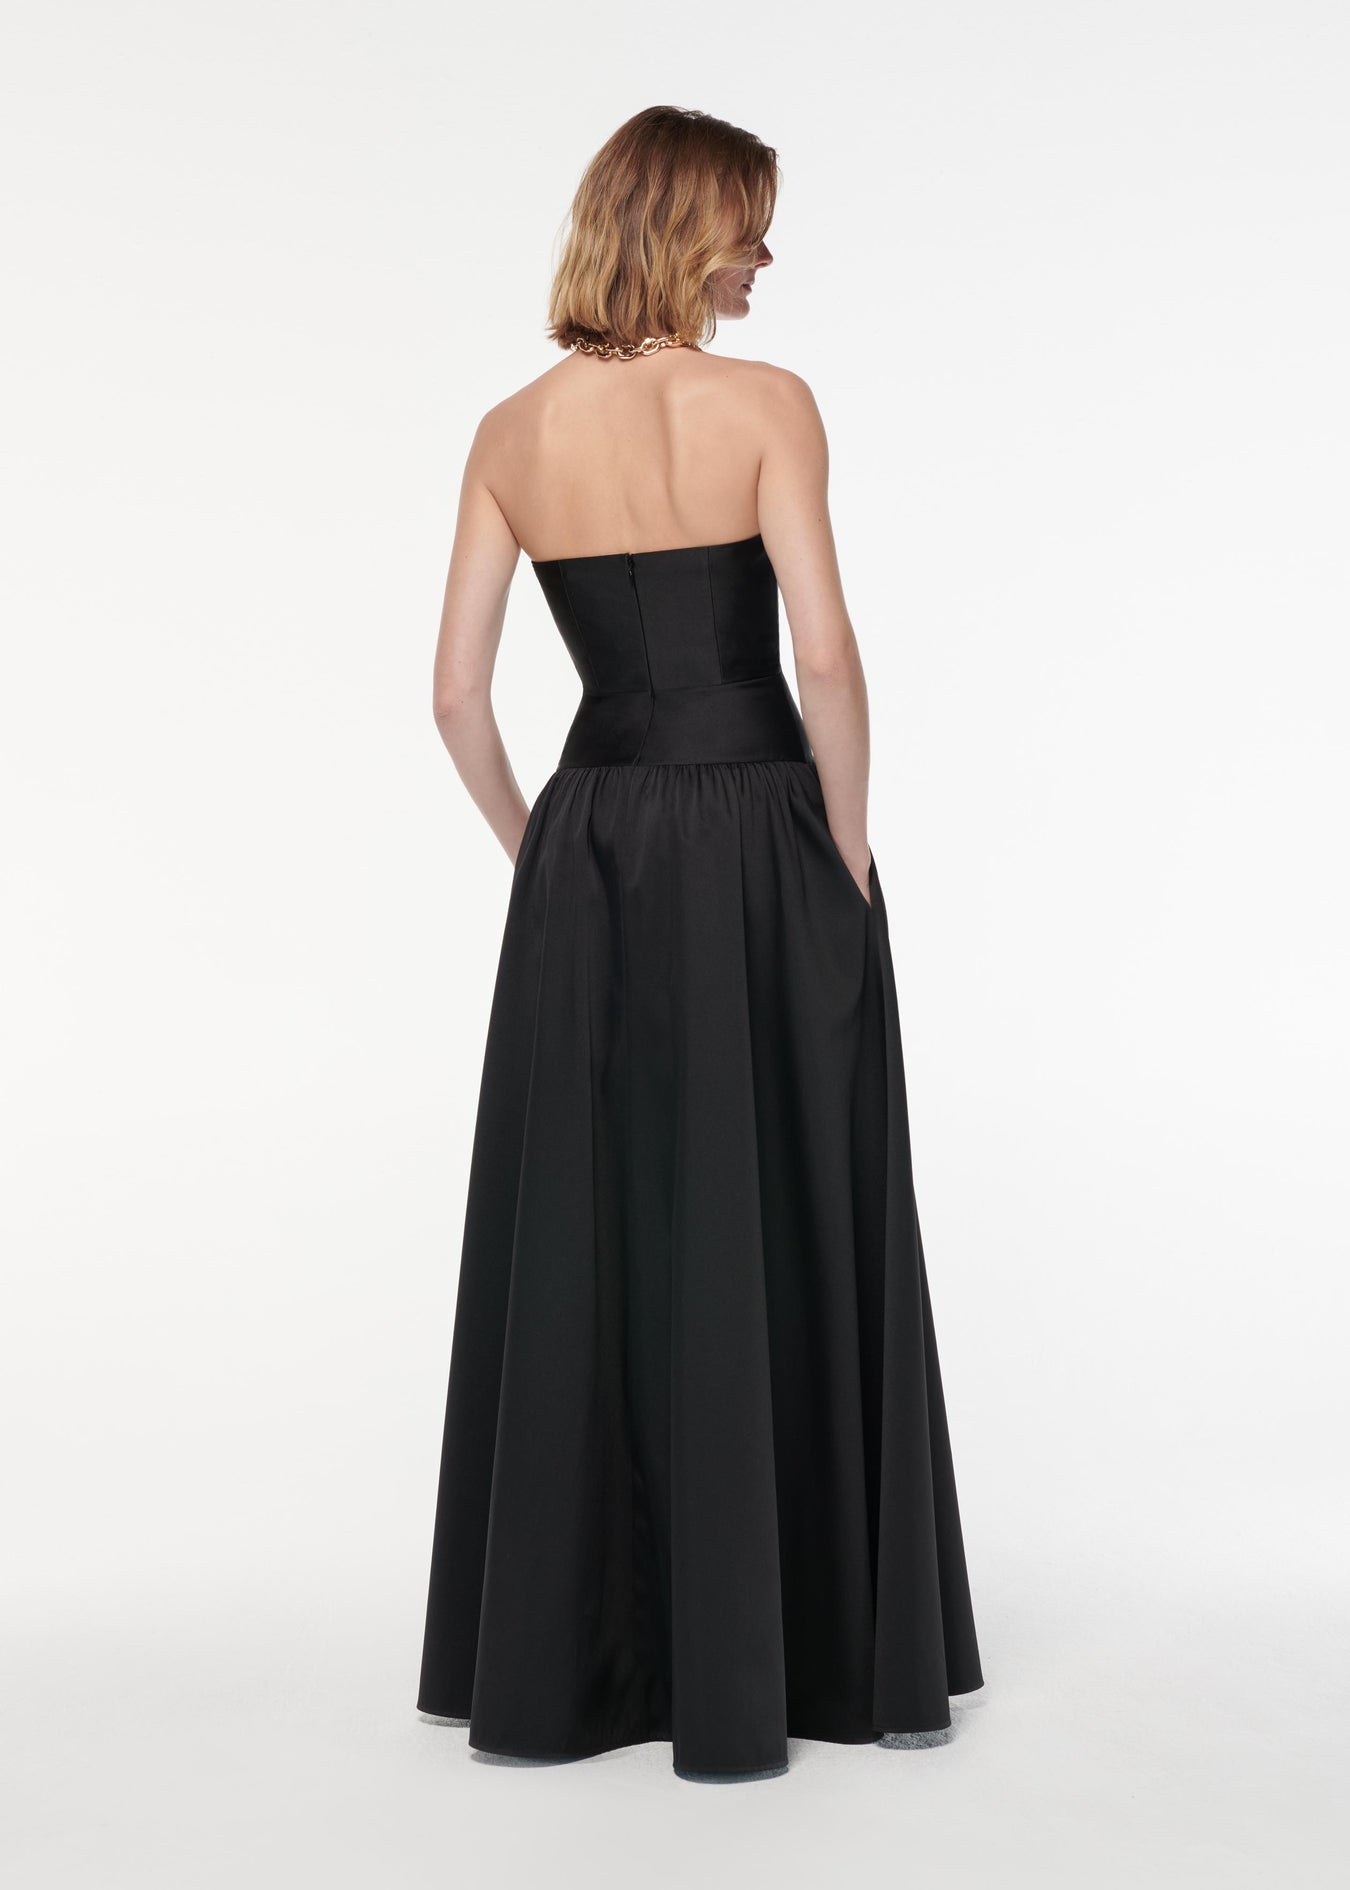 A photograph of a woman wearing a Strapless Taffeta Gown in Black